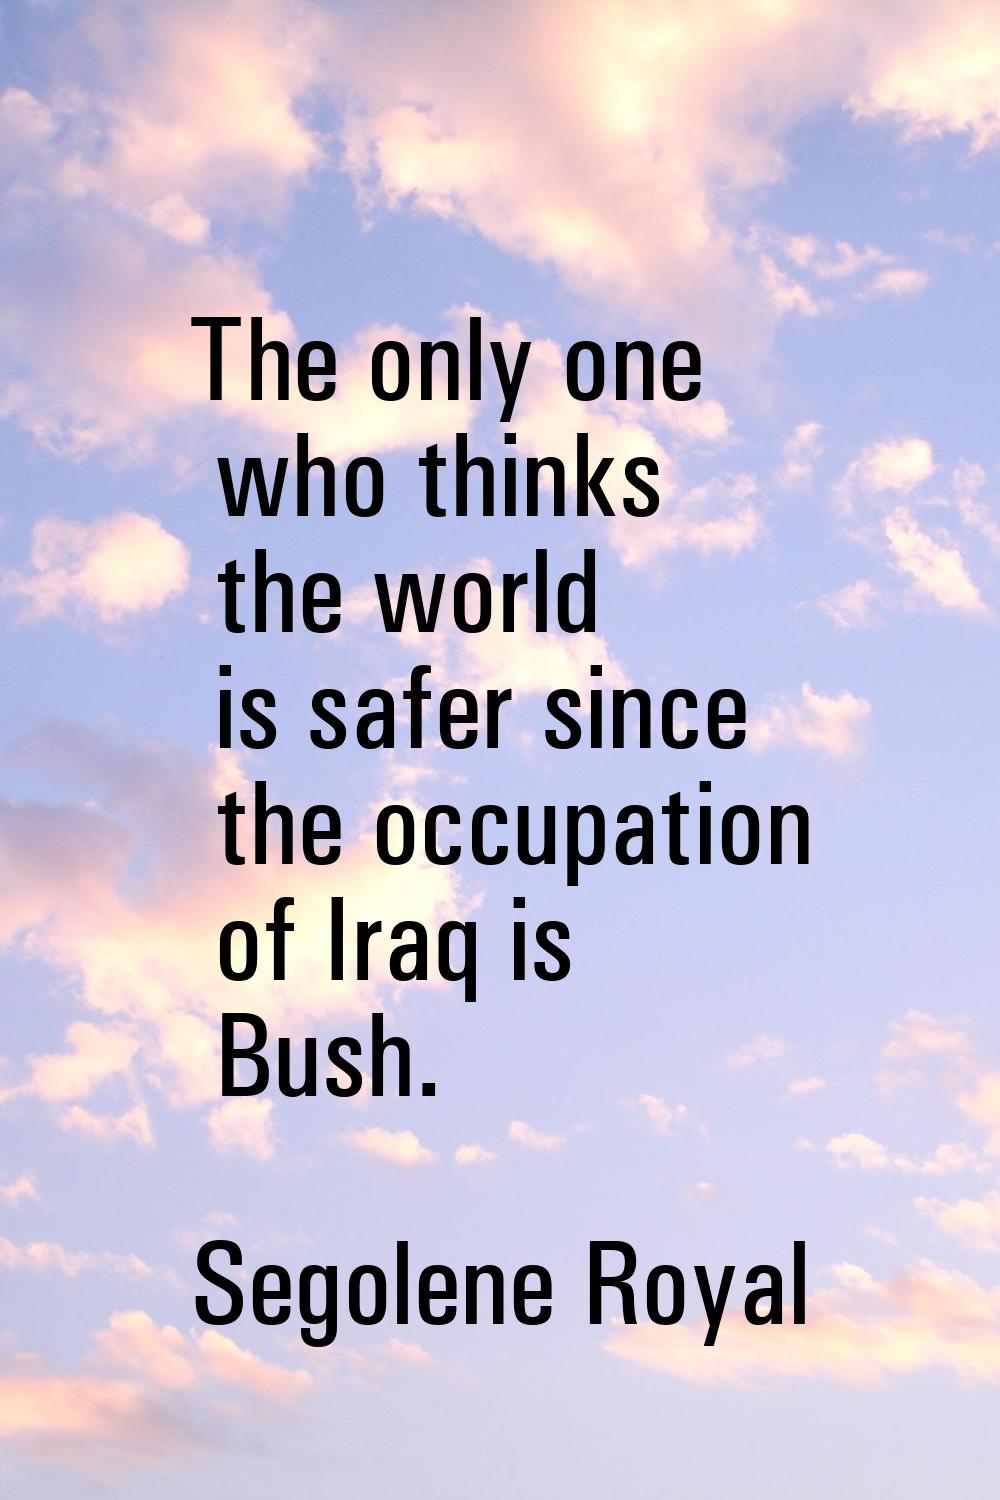 The only one who thinks the world is safer since the occupation of Iraq is Bush.